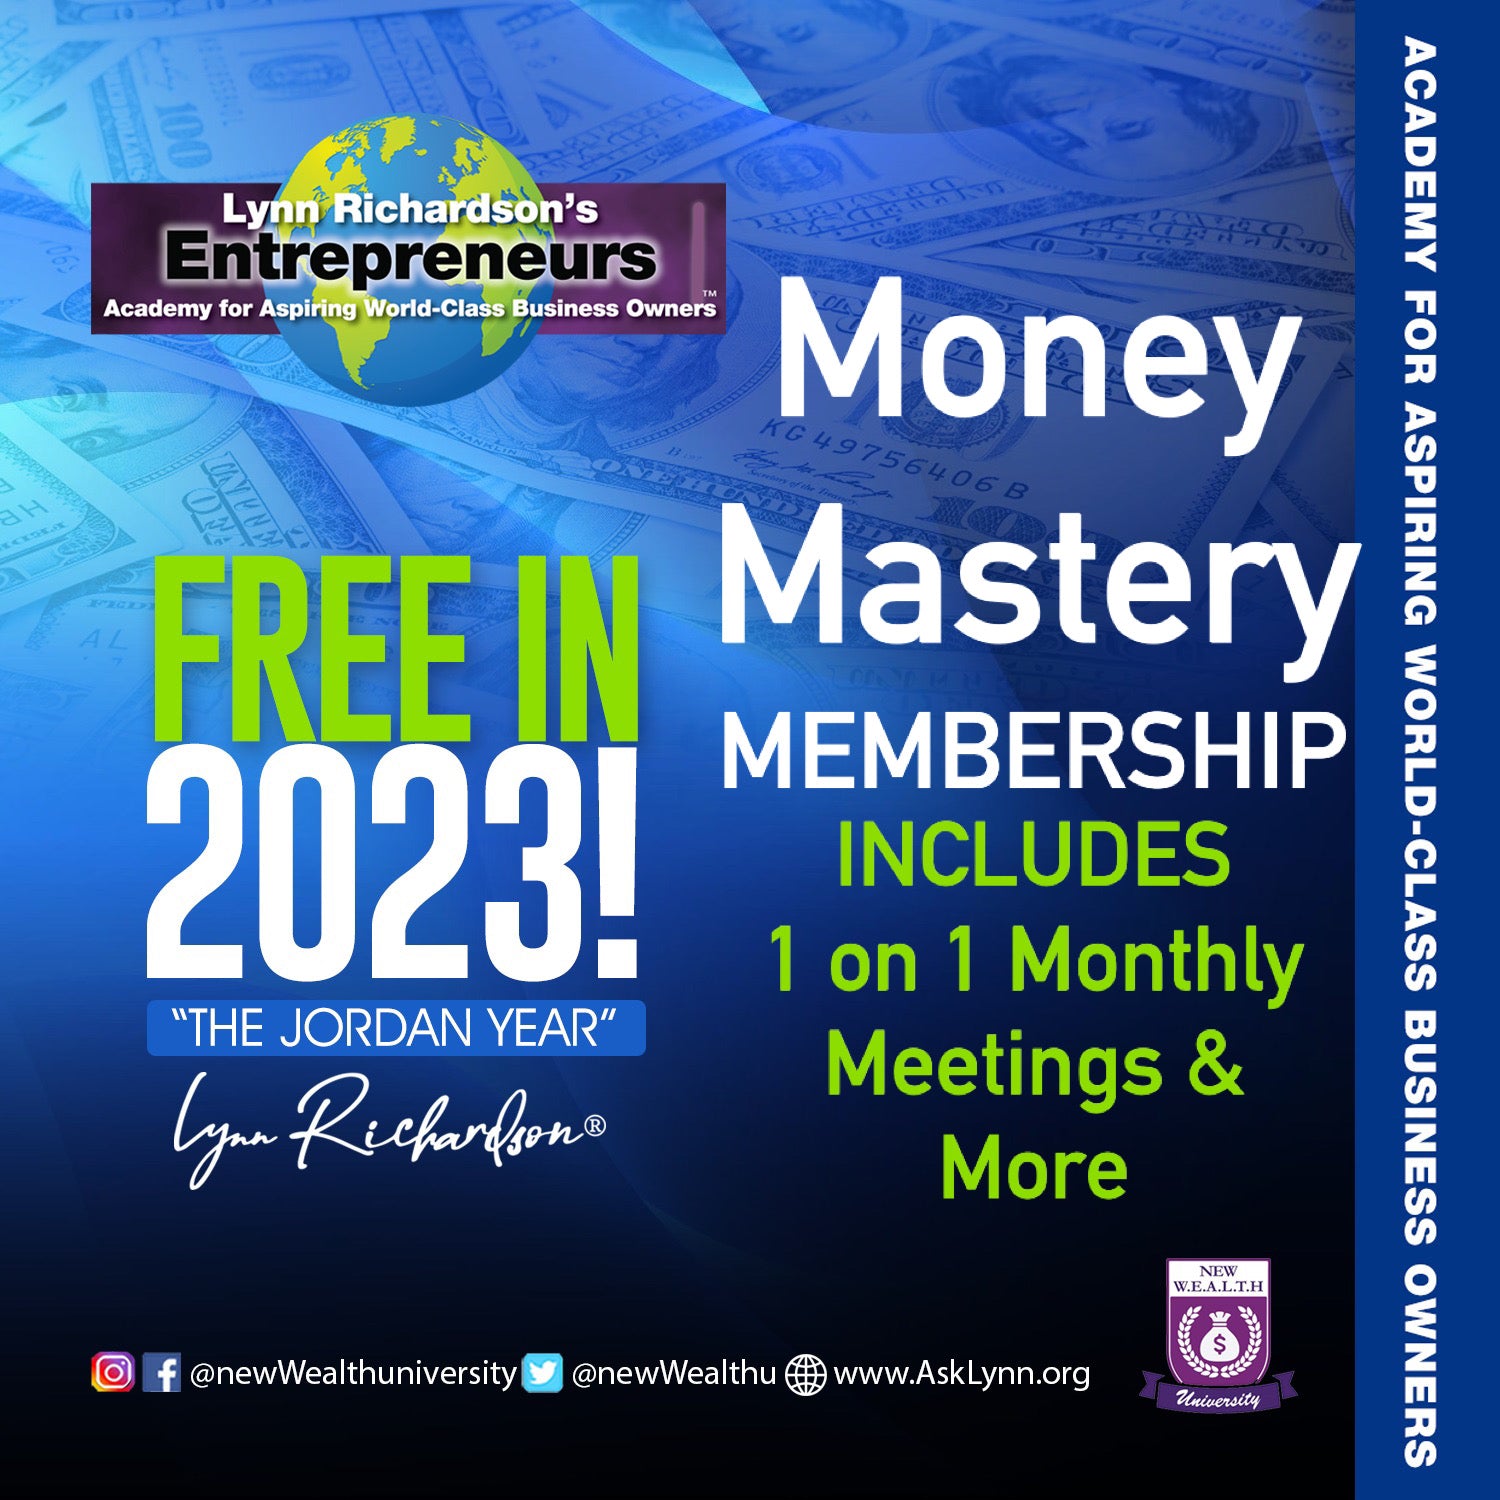 Money Mastery Coaching Membership - Incredible Deal only $89 - No Code Needed